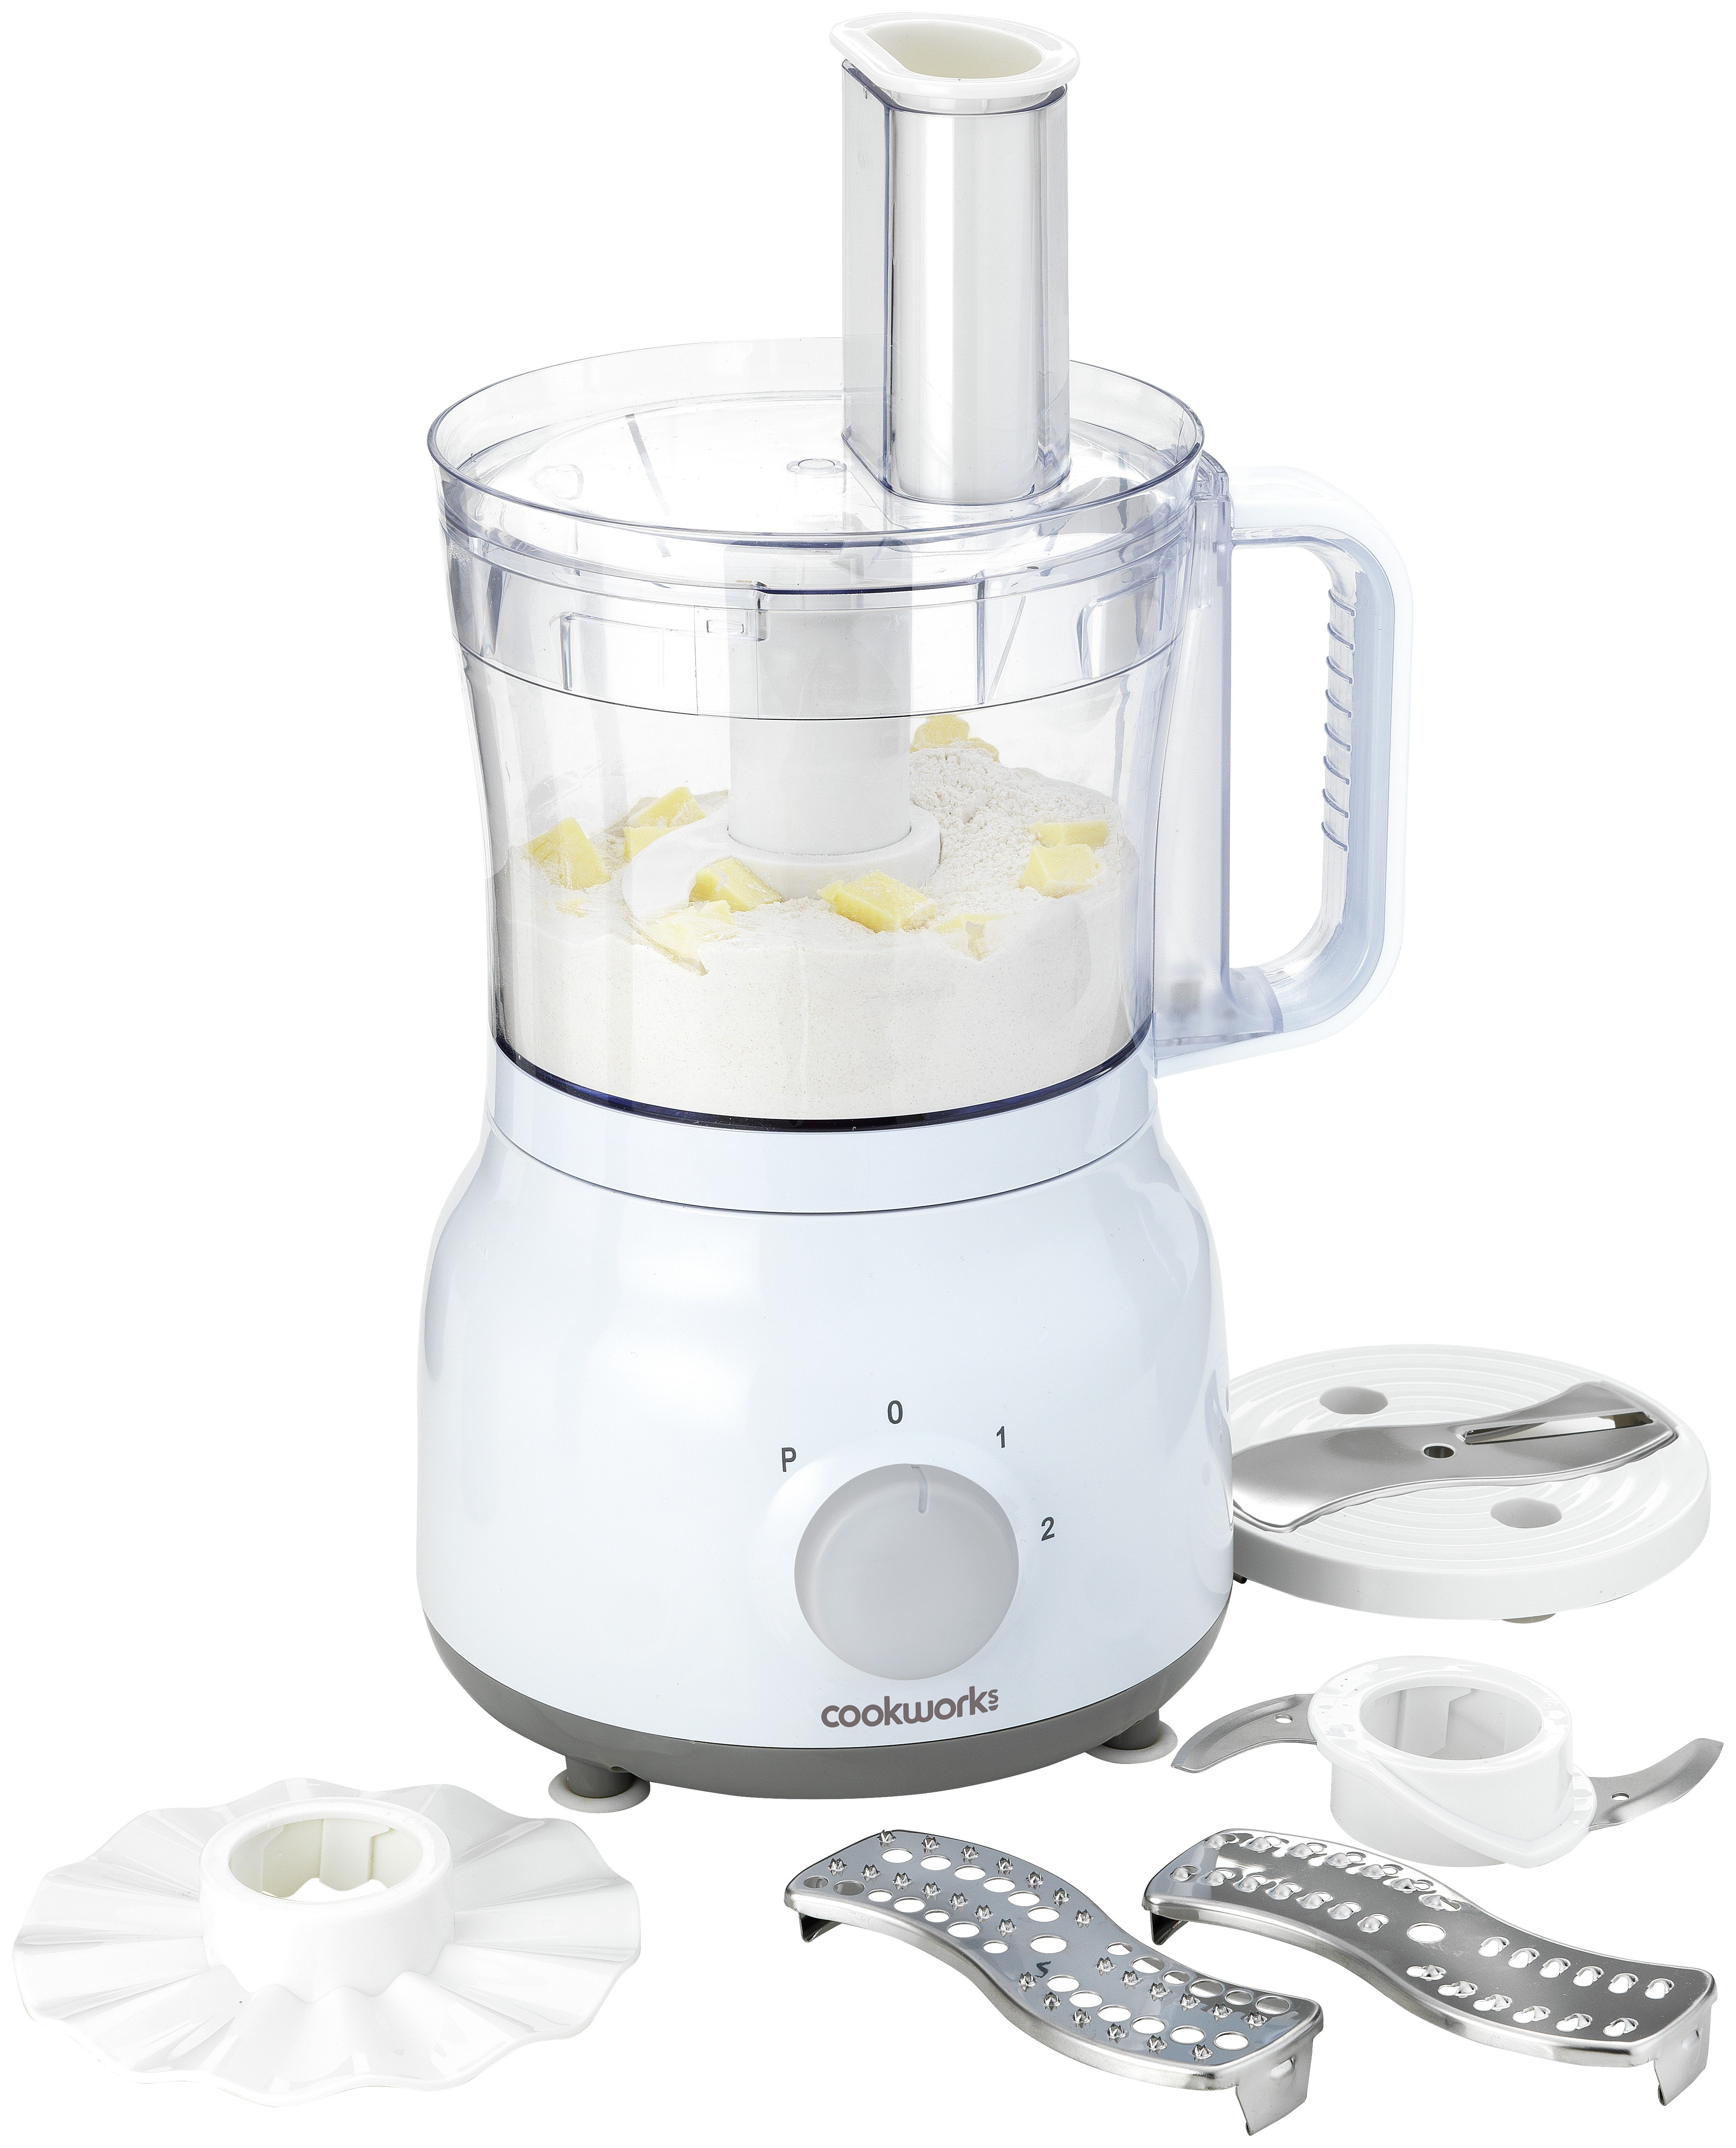 Cookworks Food Processor - Stainless Steel Review